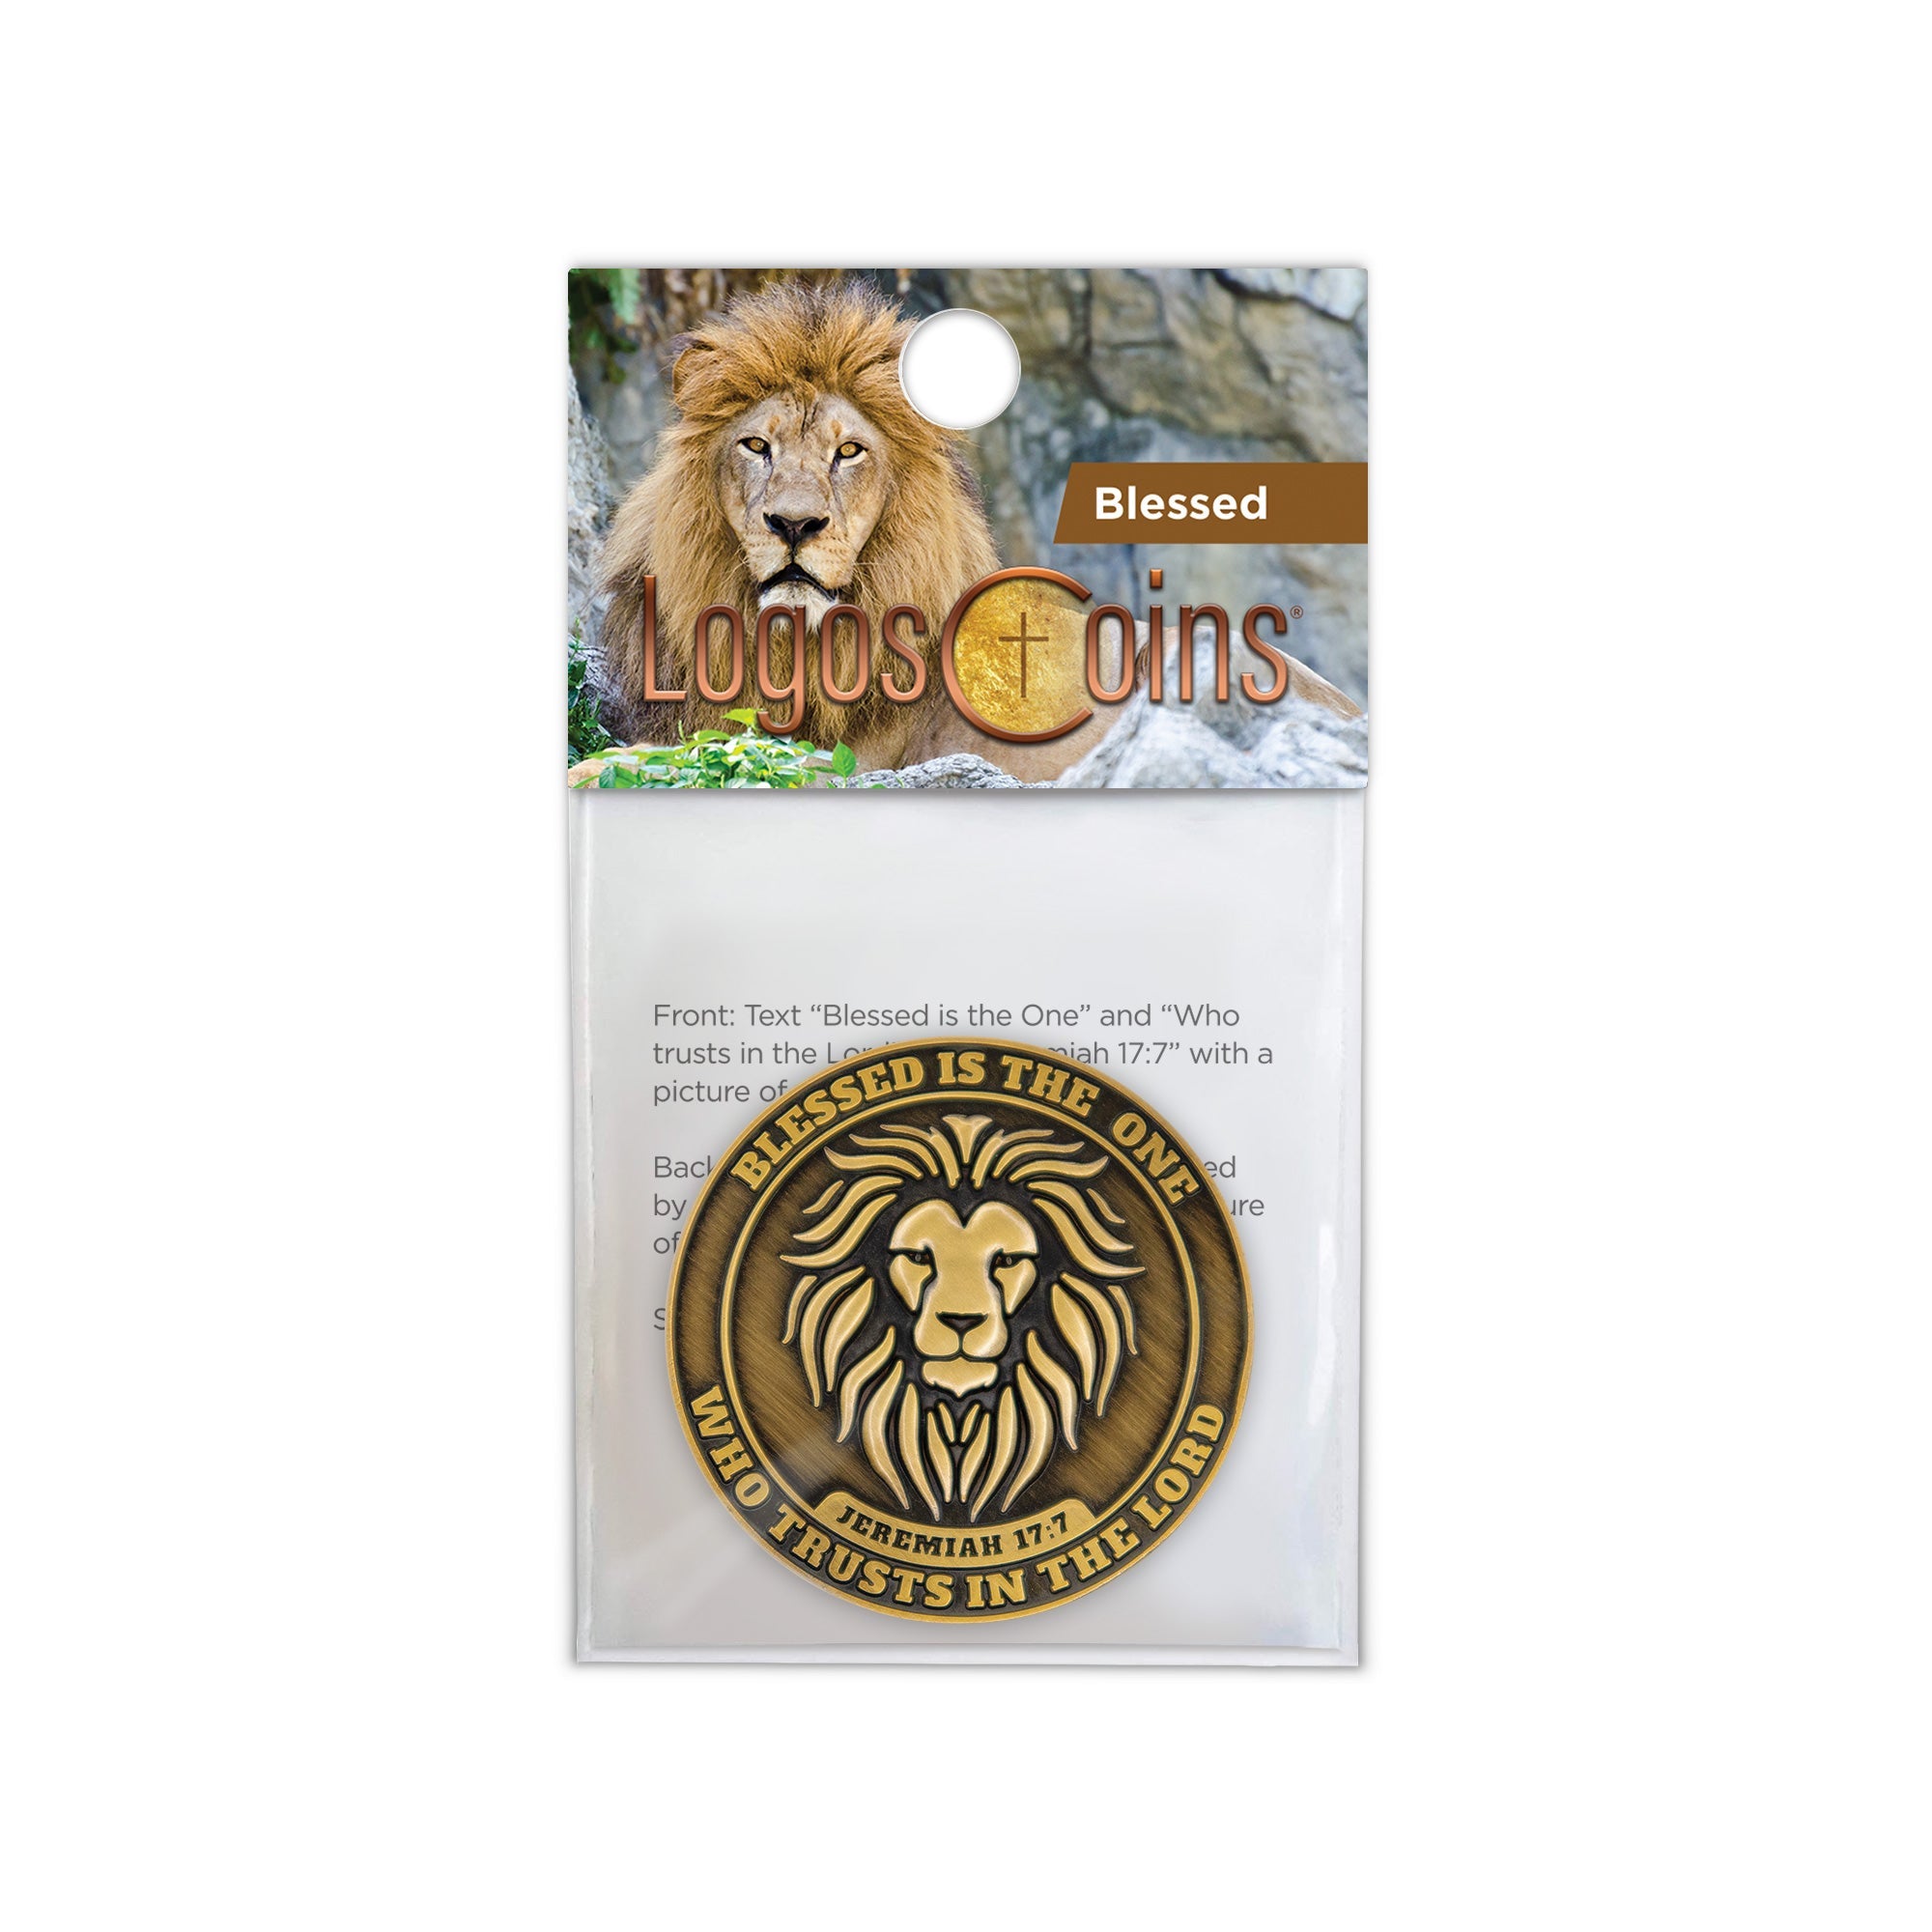 Trust in the Lord, Lion Challenge Coin